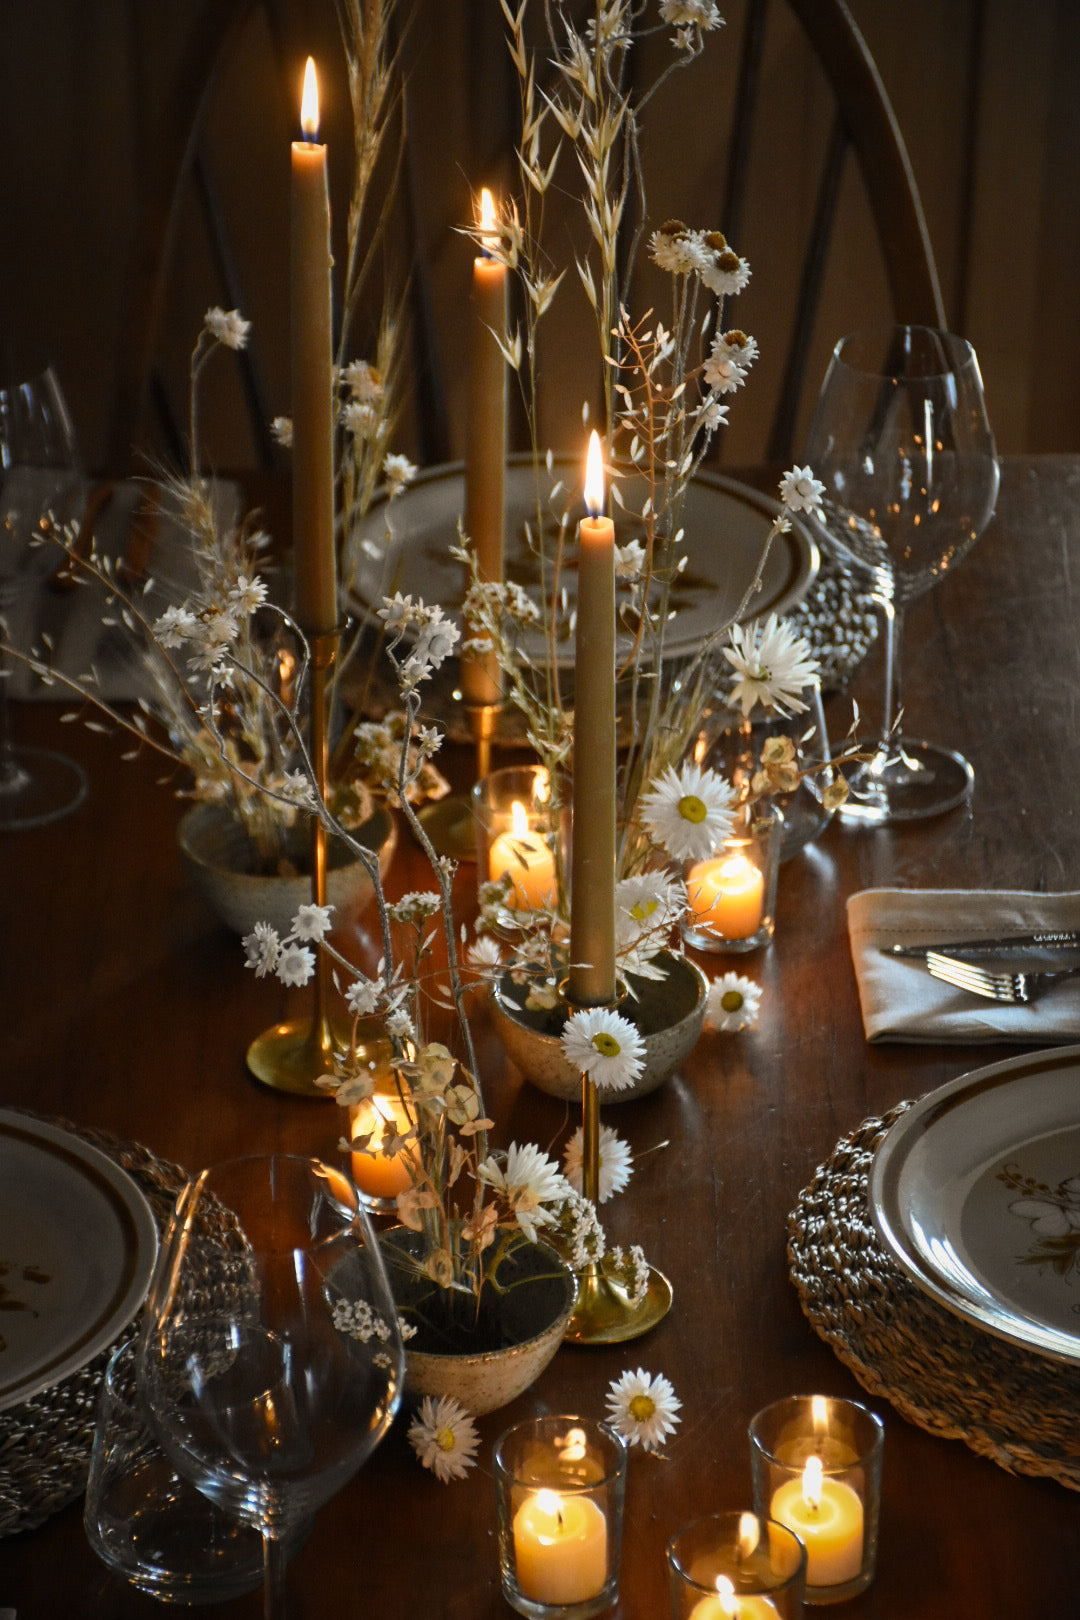 festive styling with dried flowers and candlelight amble and twine dried flowers australia